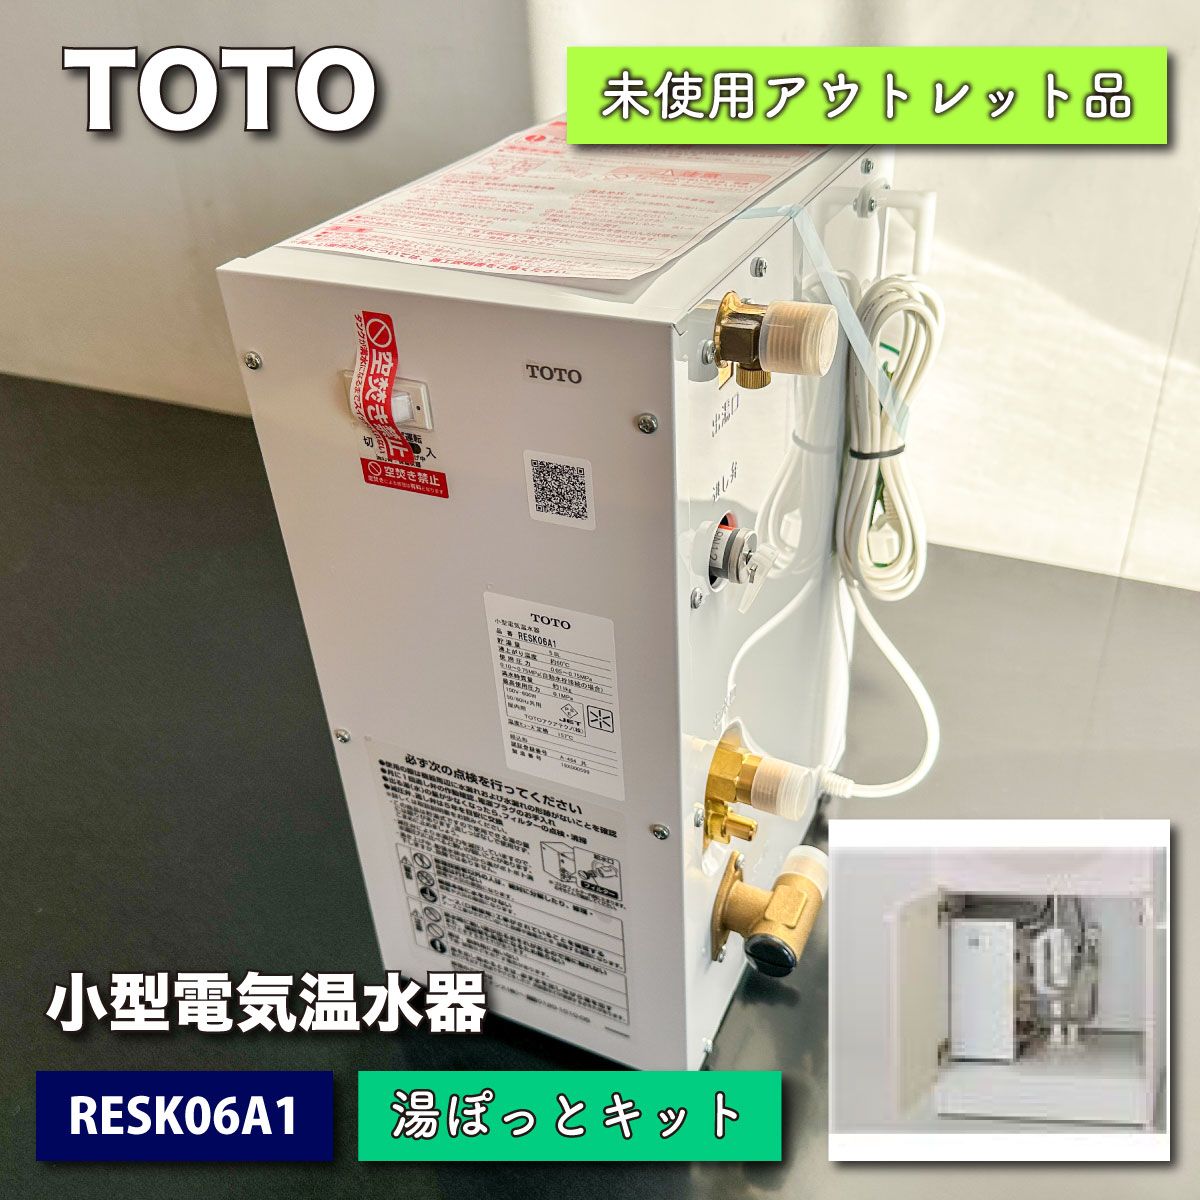 TOTO 電気温水器 RESK06A1R - その他